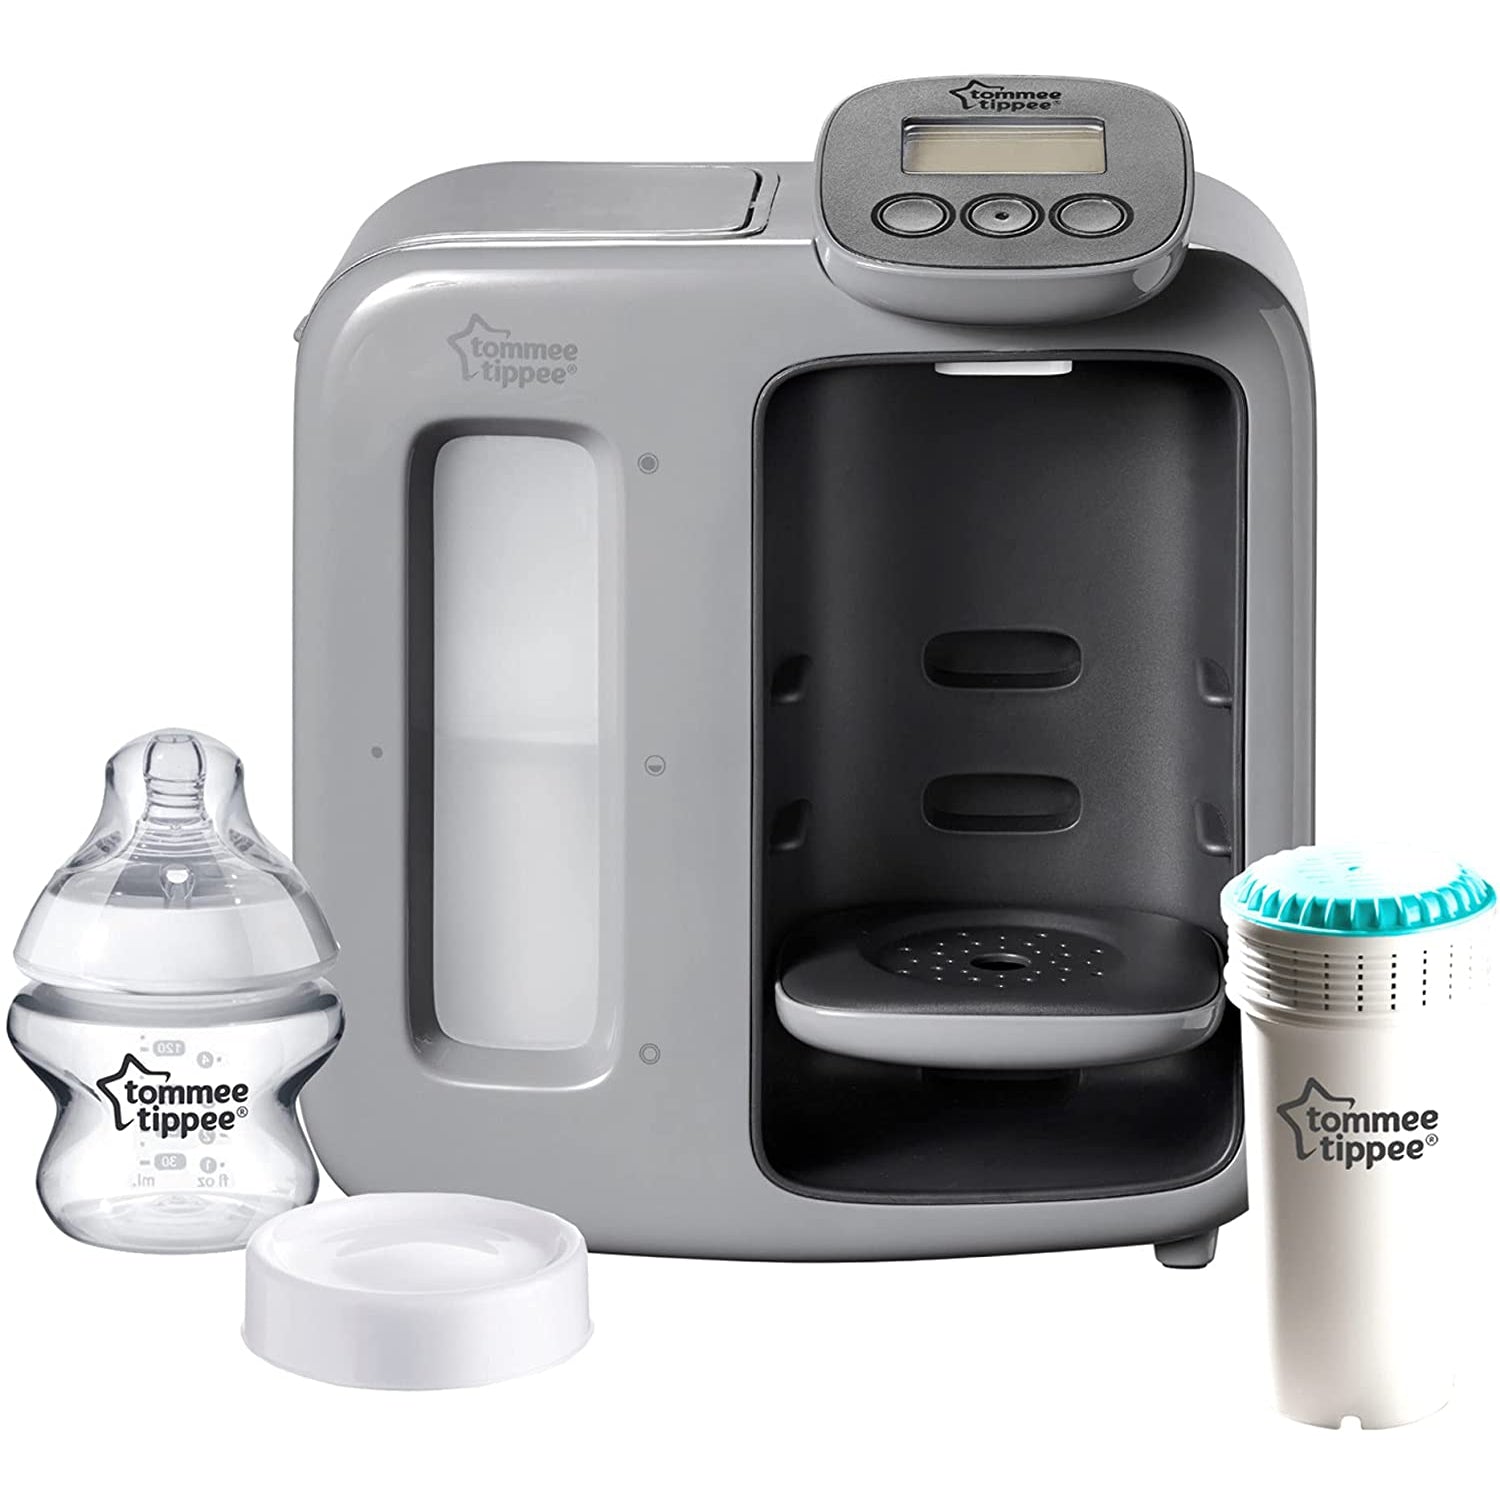 Tommee Tippee Perfect Prep Day & Night, Baby Bottle Maker Machine - Grey